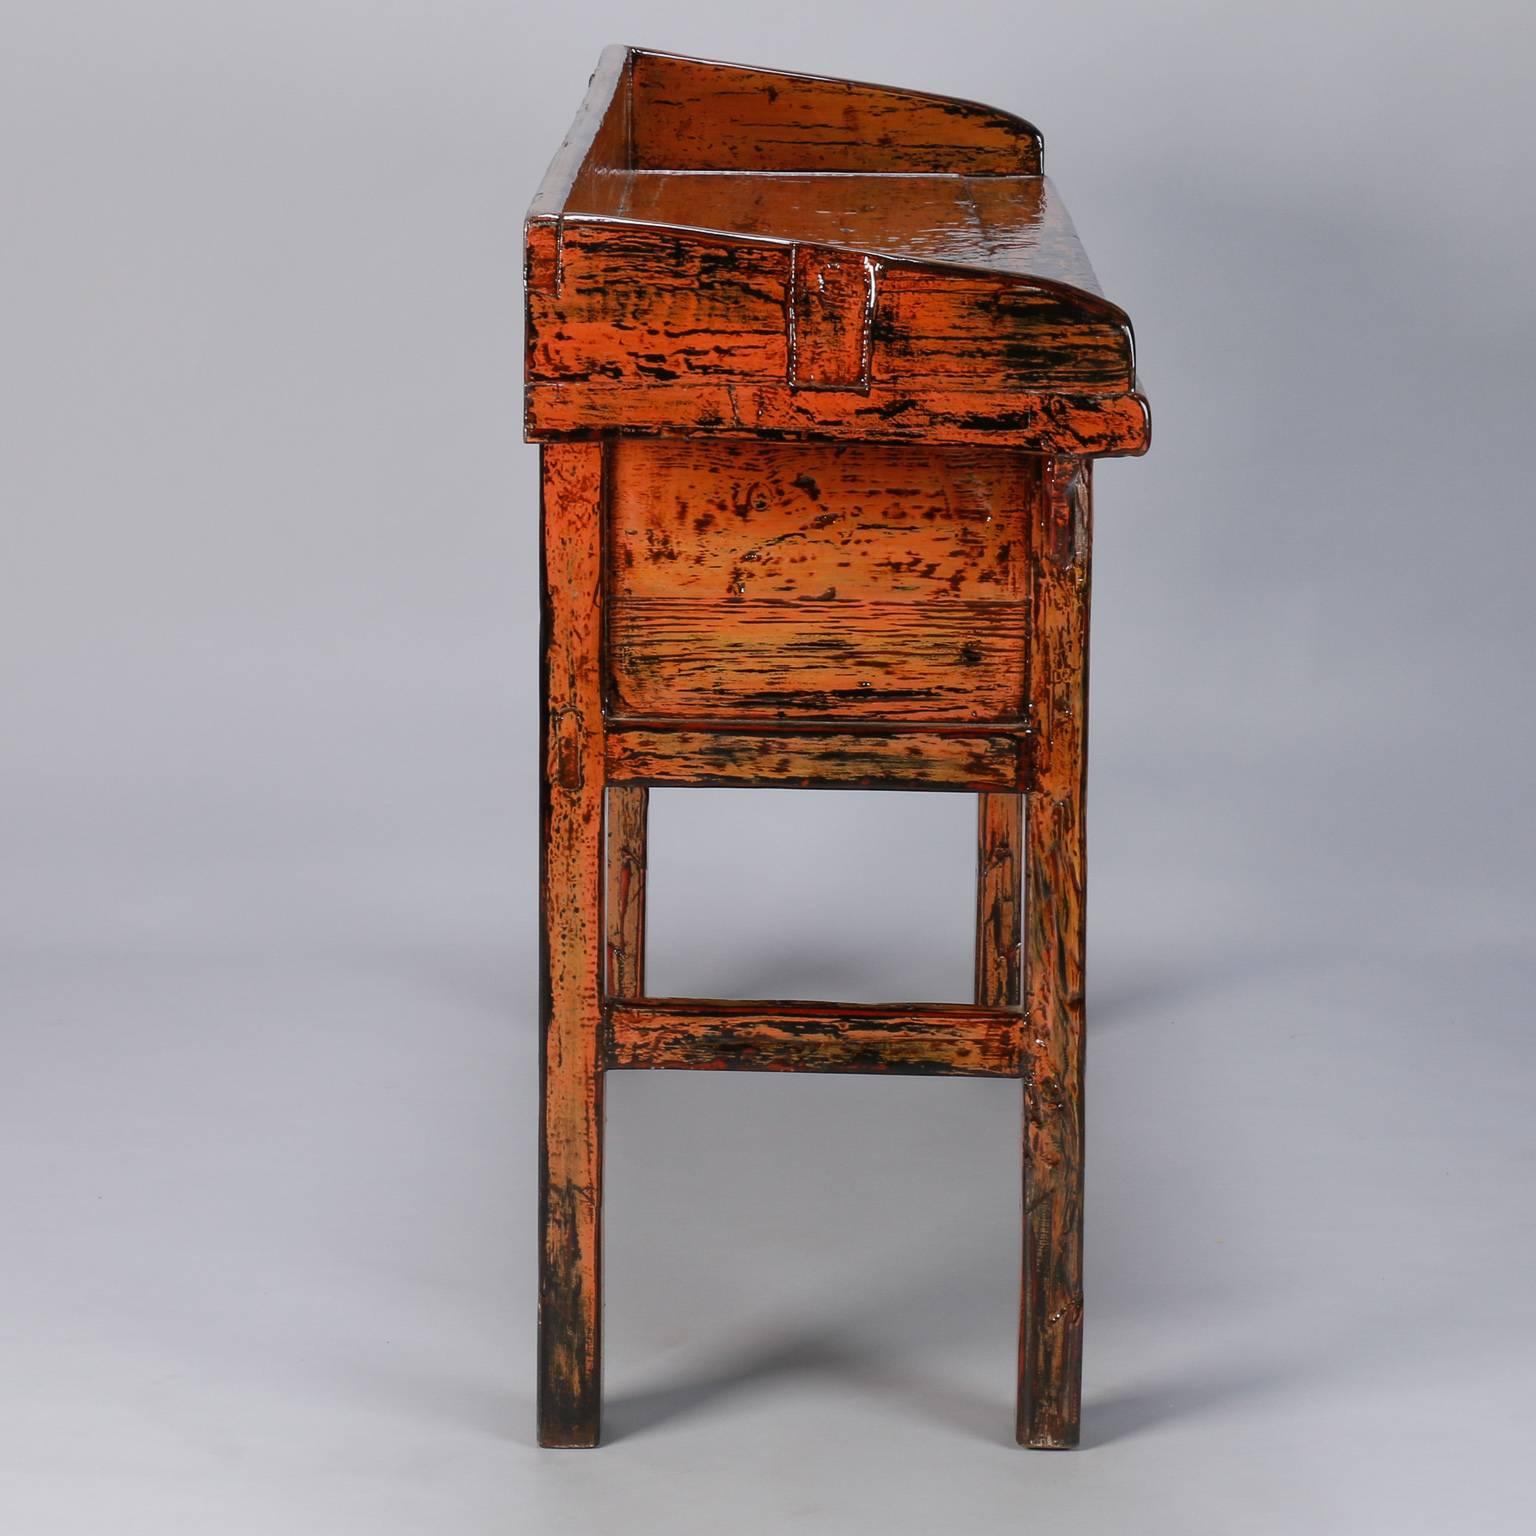 Painted three-drawer Chinese console in dark orange painted and lacquered finish, circa 1900. Worn, primitive paint has fresh coat of lacquer.

 